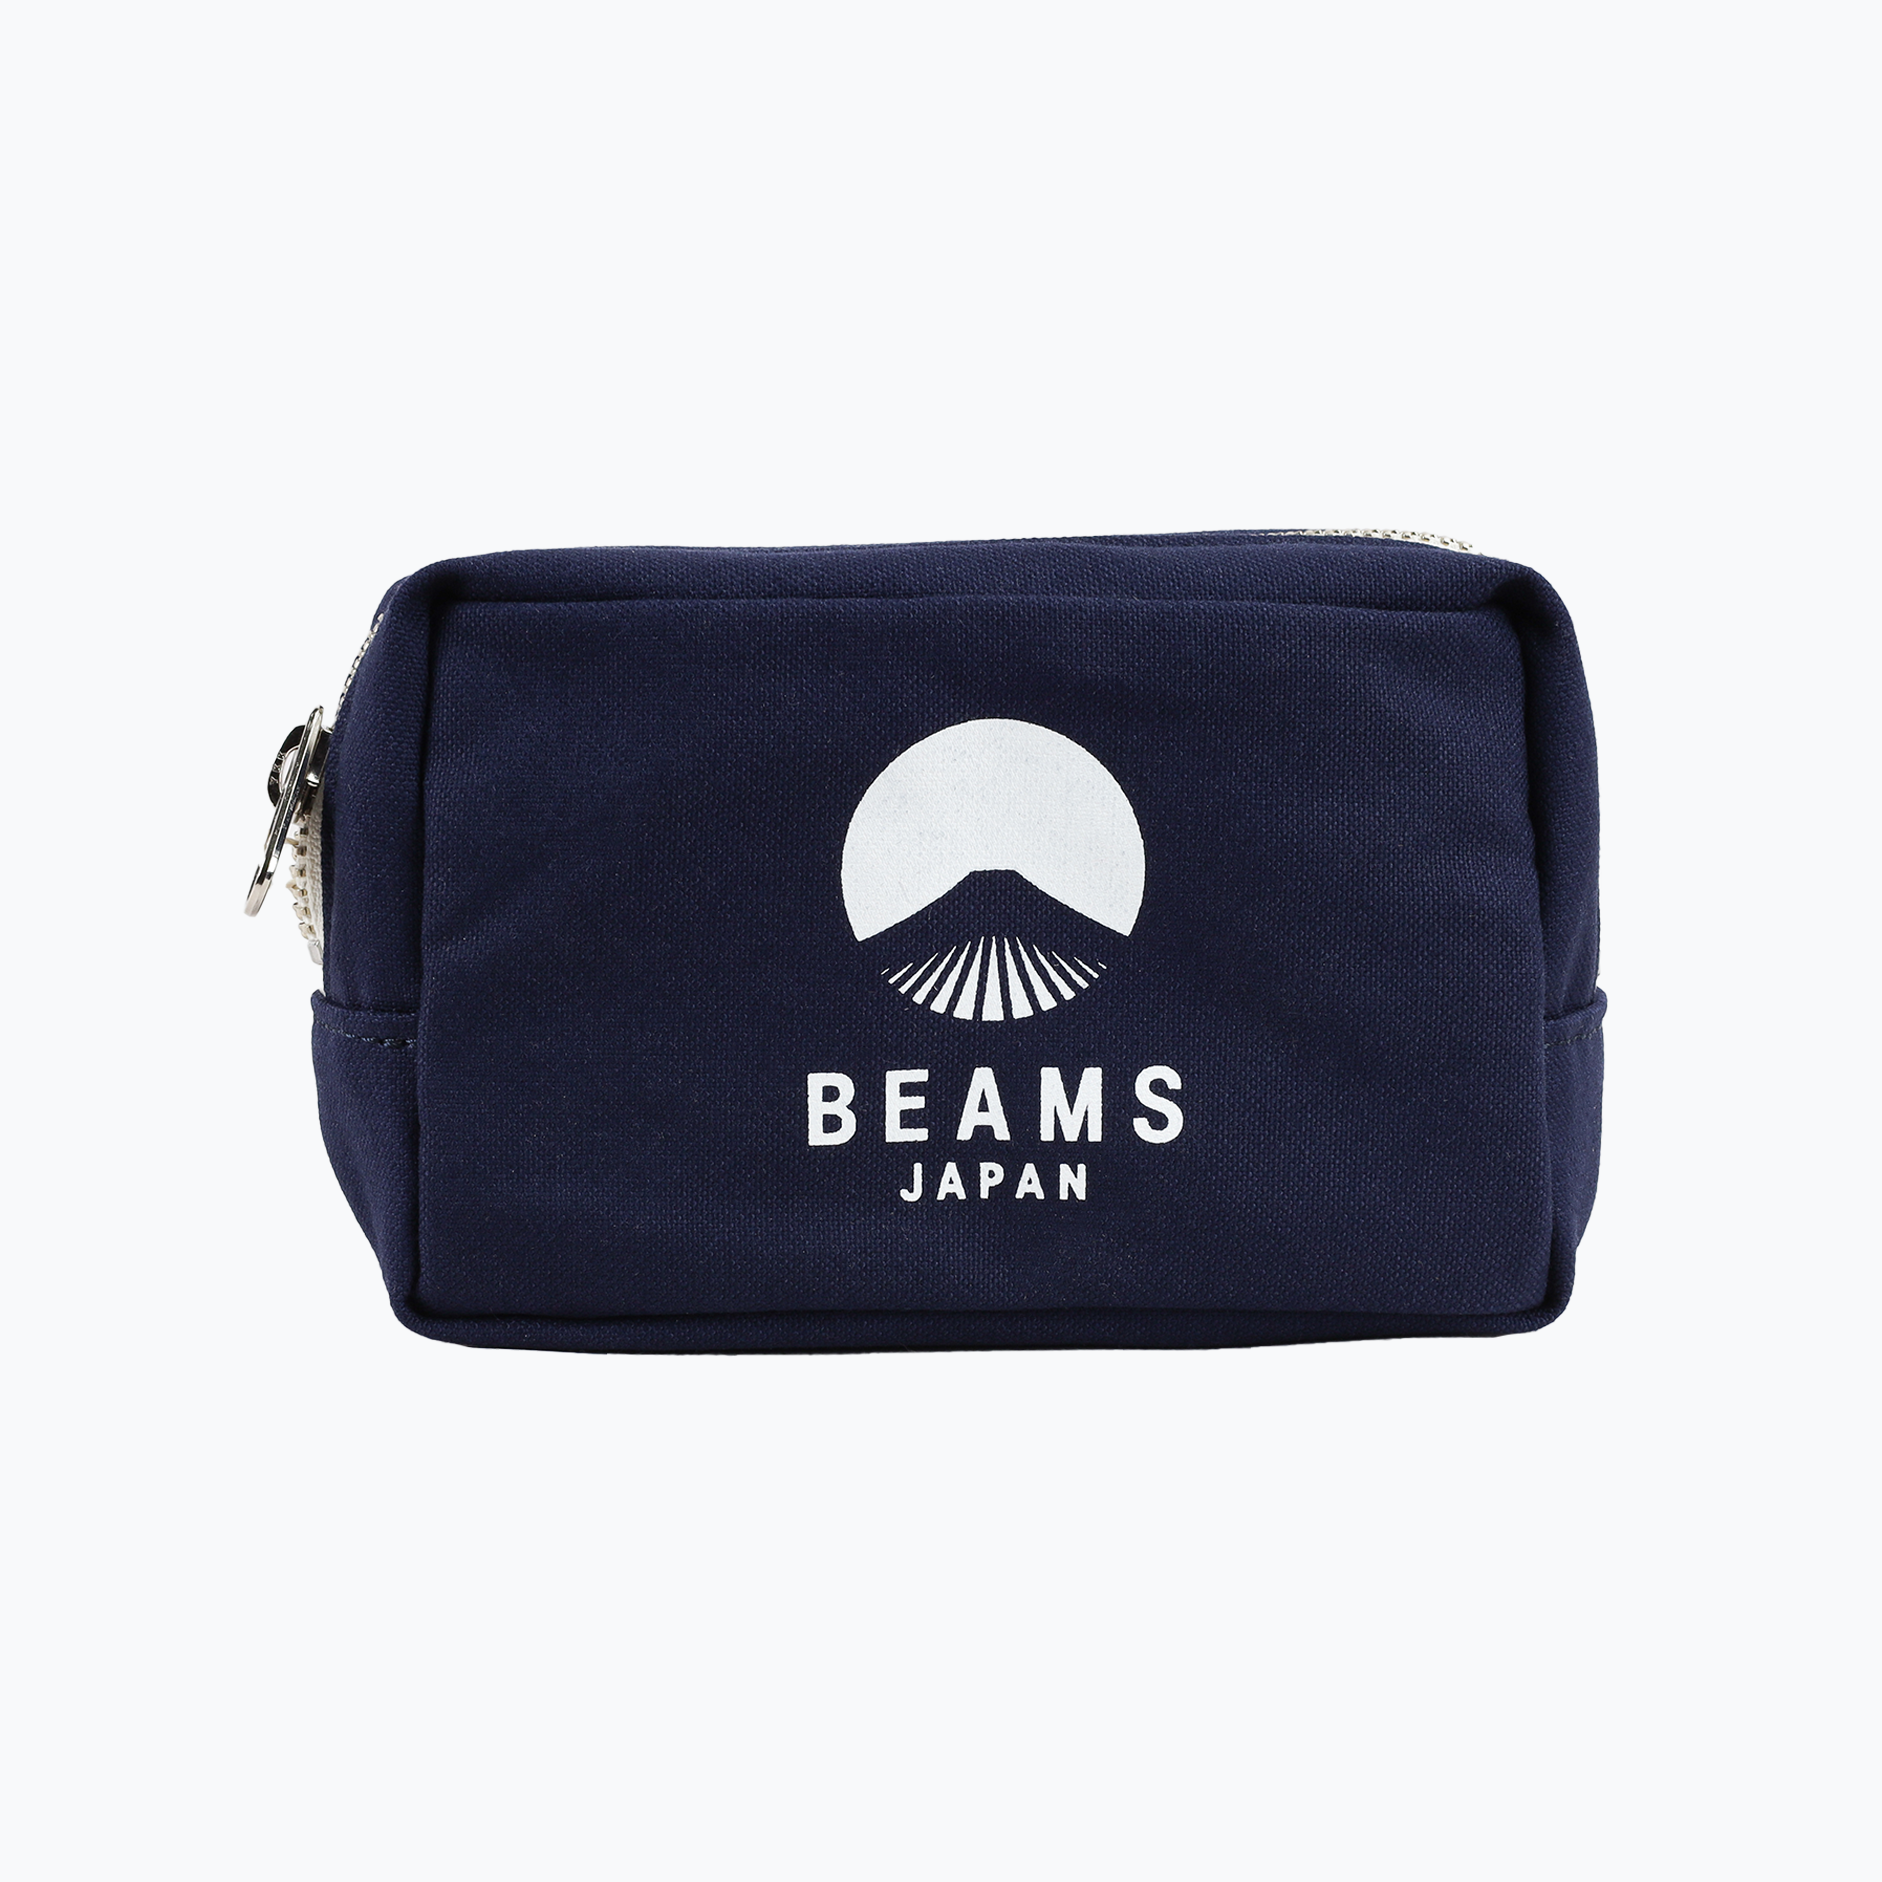 BEAMS JAPAN X EVERGREEN WORKS POUCH POUCH (M) - NAVY